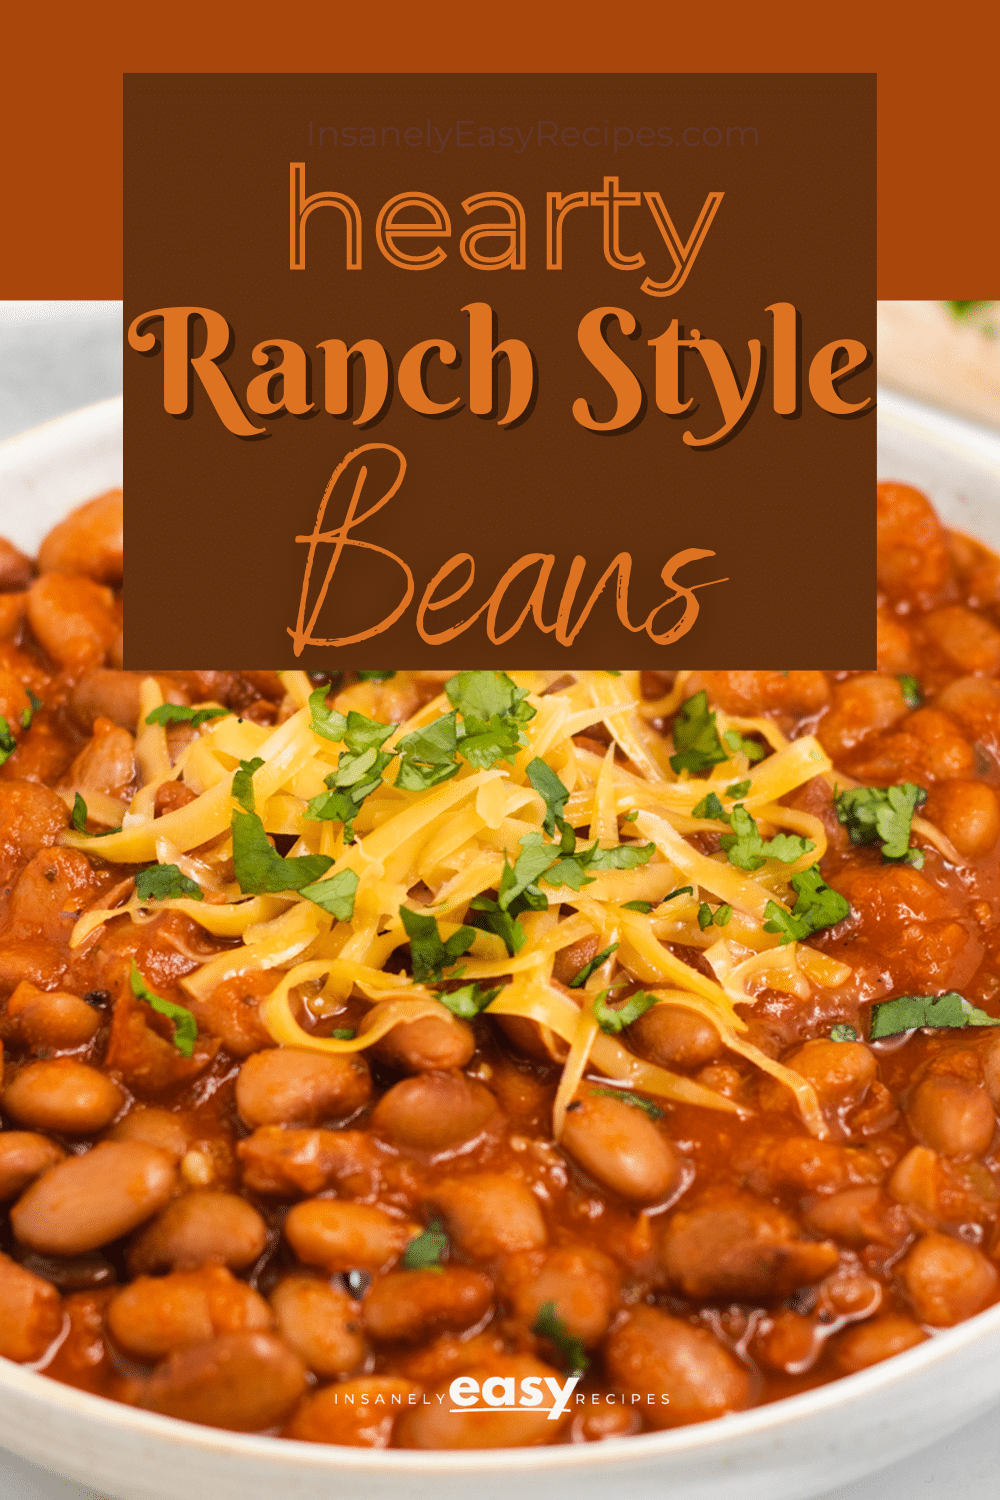 a bowl of beans topped with cheese. Text box overlay says "hearty ranch style beans"